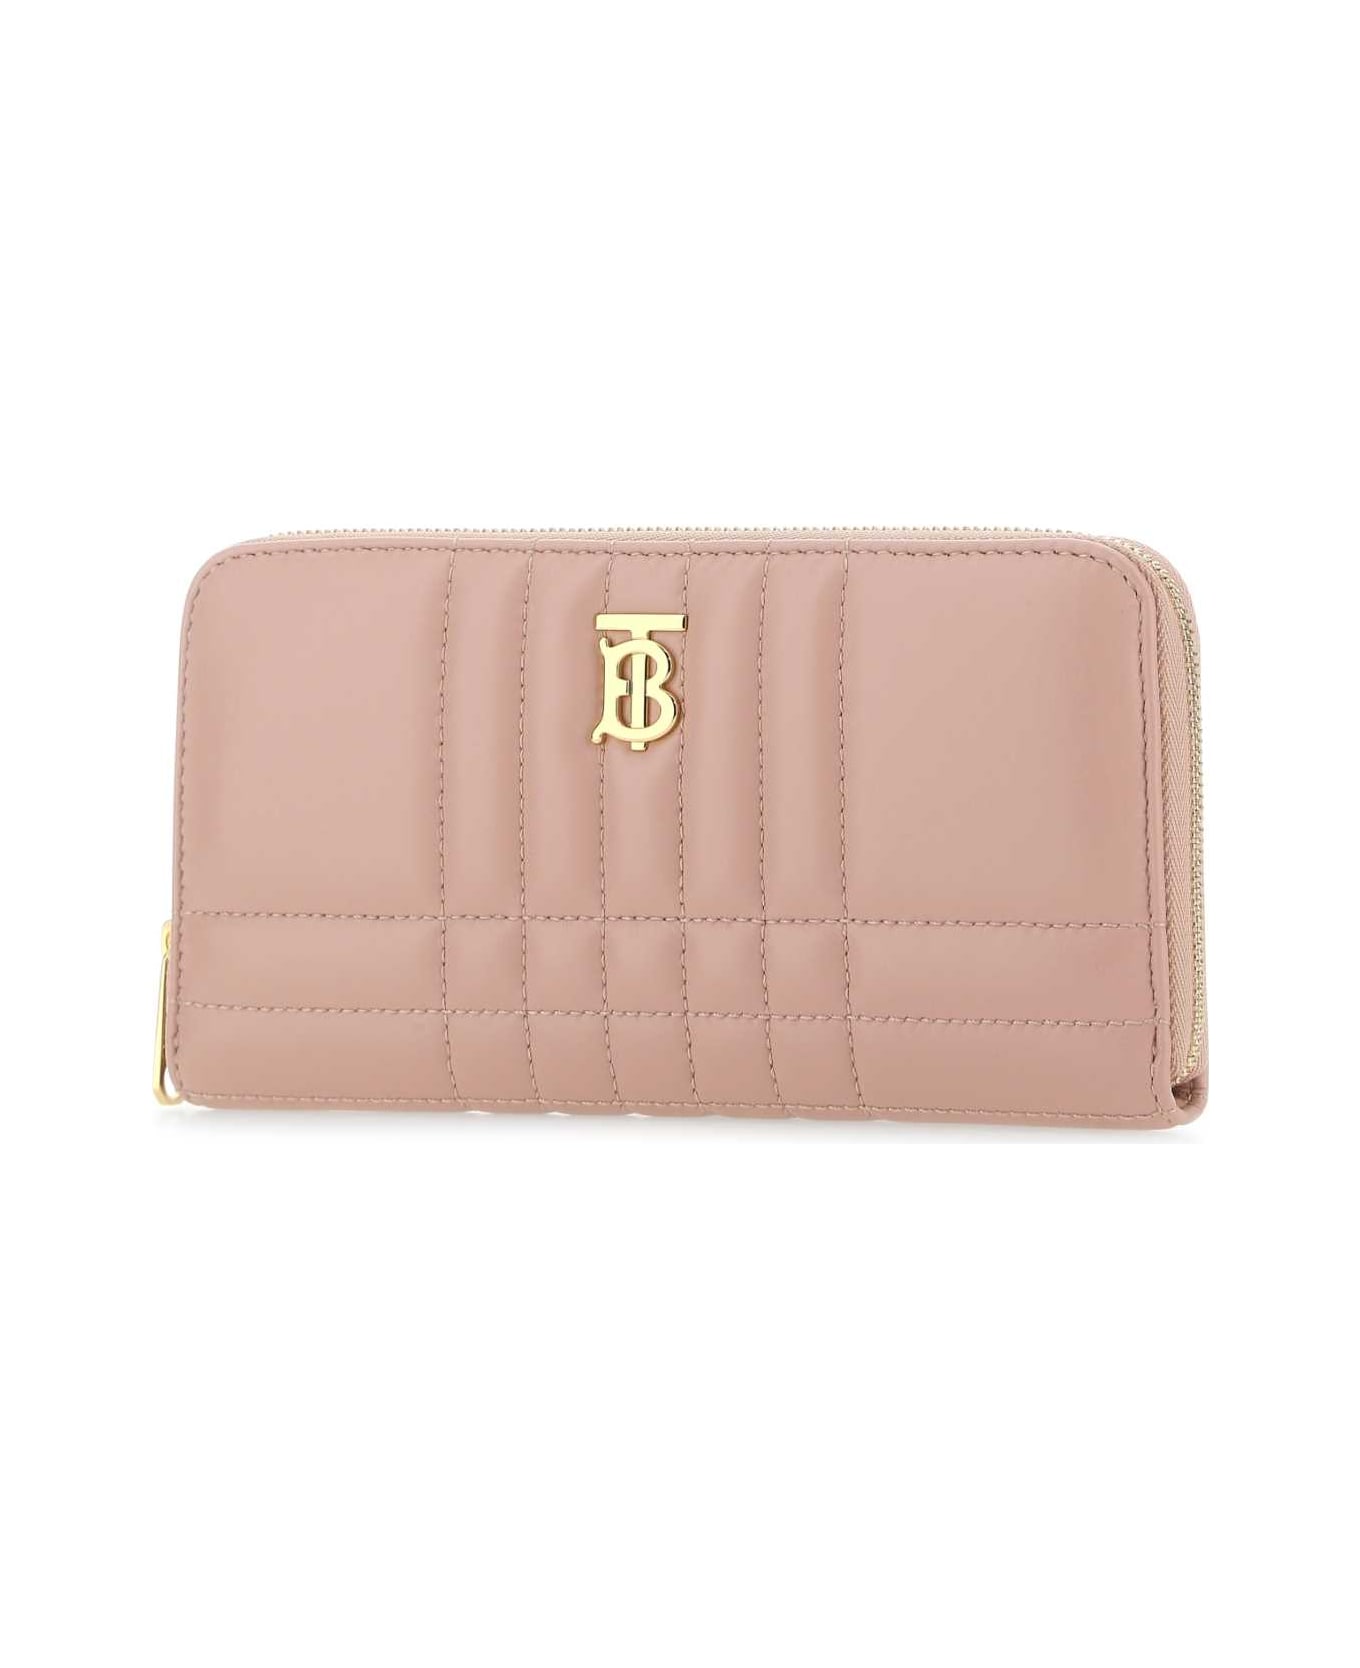 Burberry Pink Nappa Leather Lola Wallet - A3661